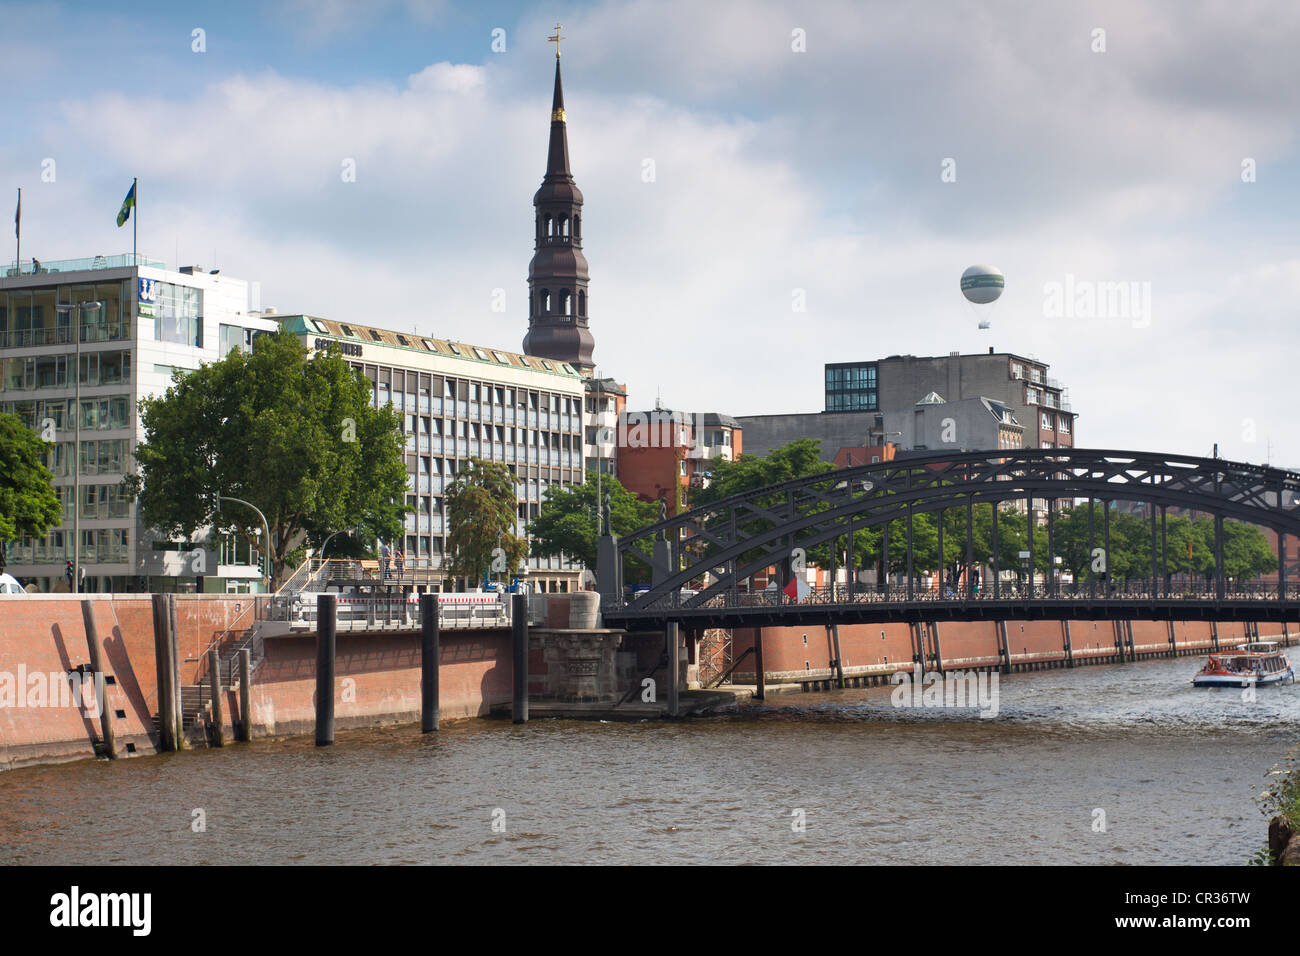 View from the Hamburg Speicherstadt historic warehouse district over the inland port and the tower of St. Catherine's Church Stock Photo